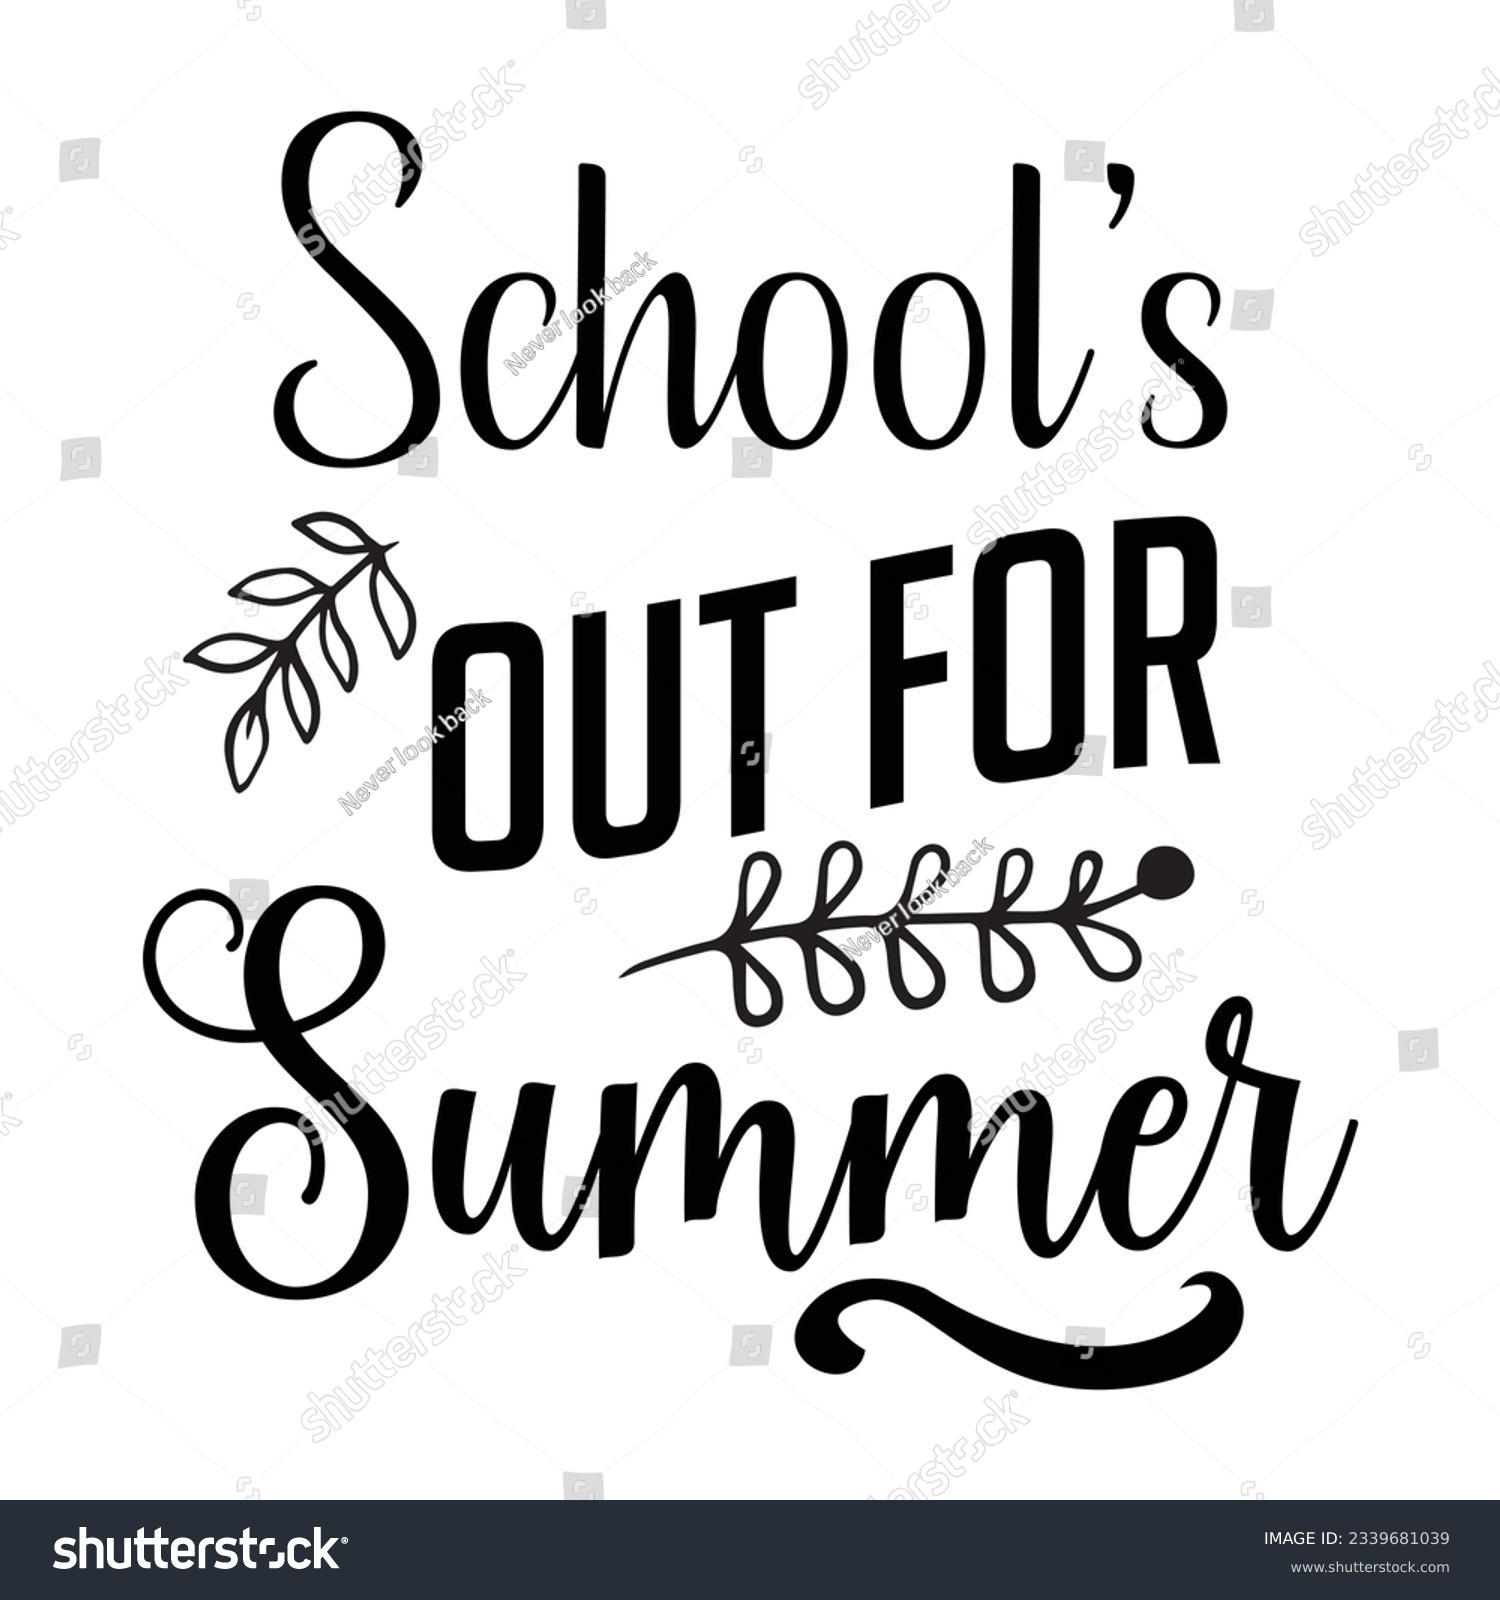 SVG of school's out for summer SVG t-shirt design, summer SVG, summer quotes  SVG, waves SVG, beach , summer time  , Hand drawn vintage illustration with lettering and decoration elements svg